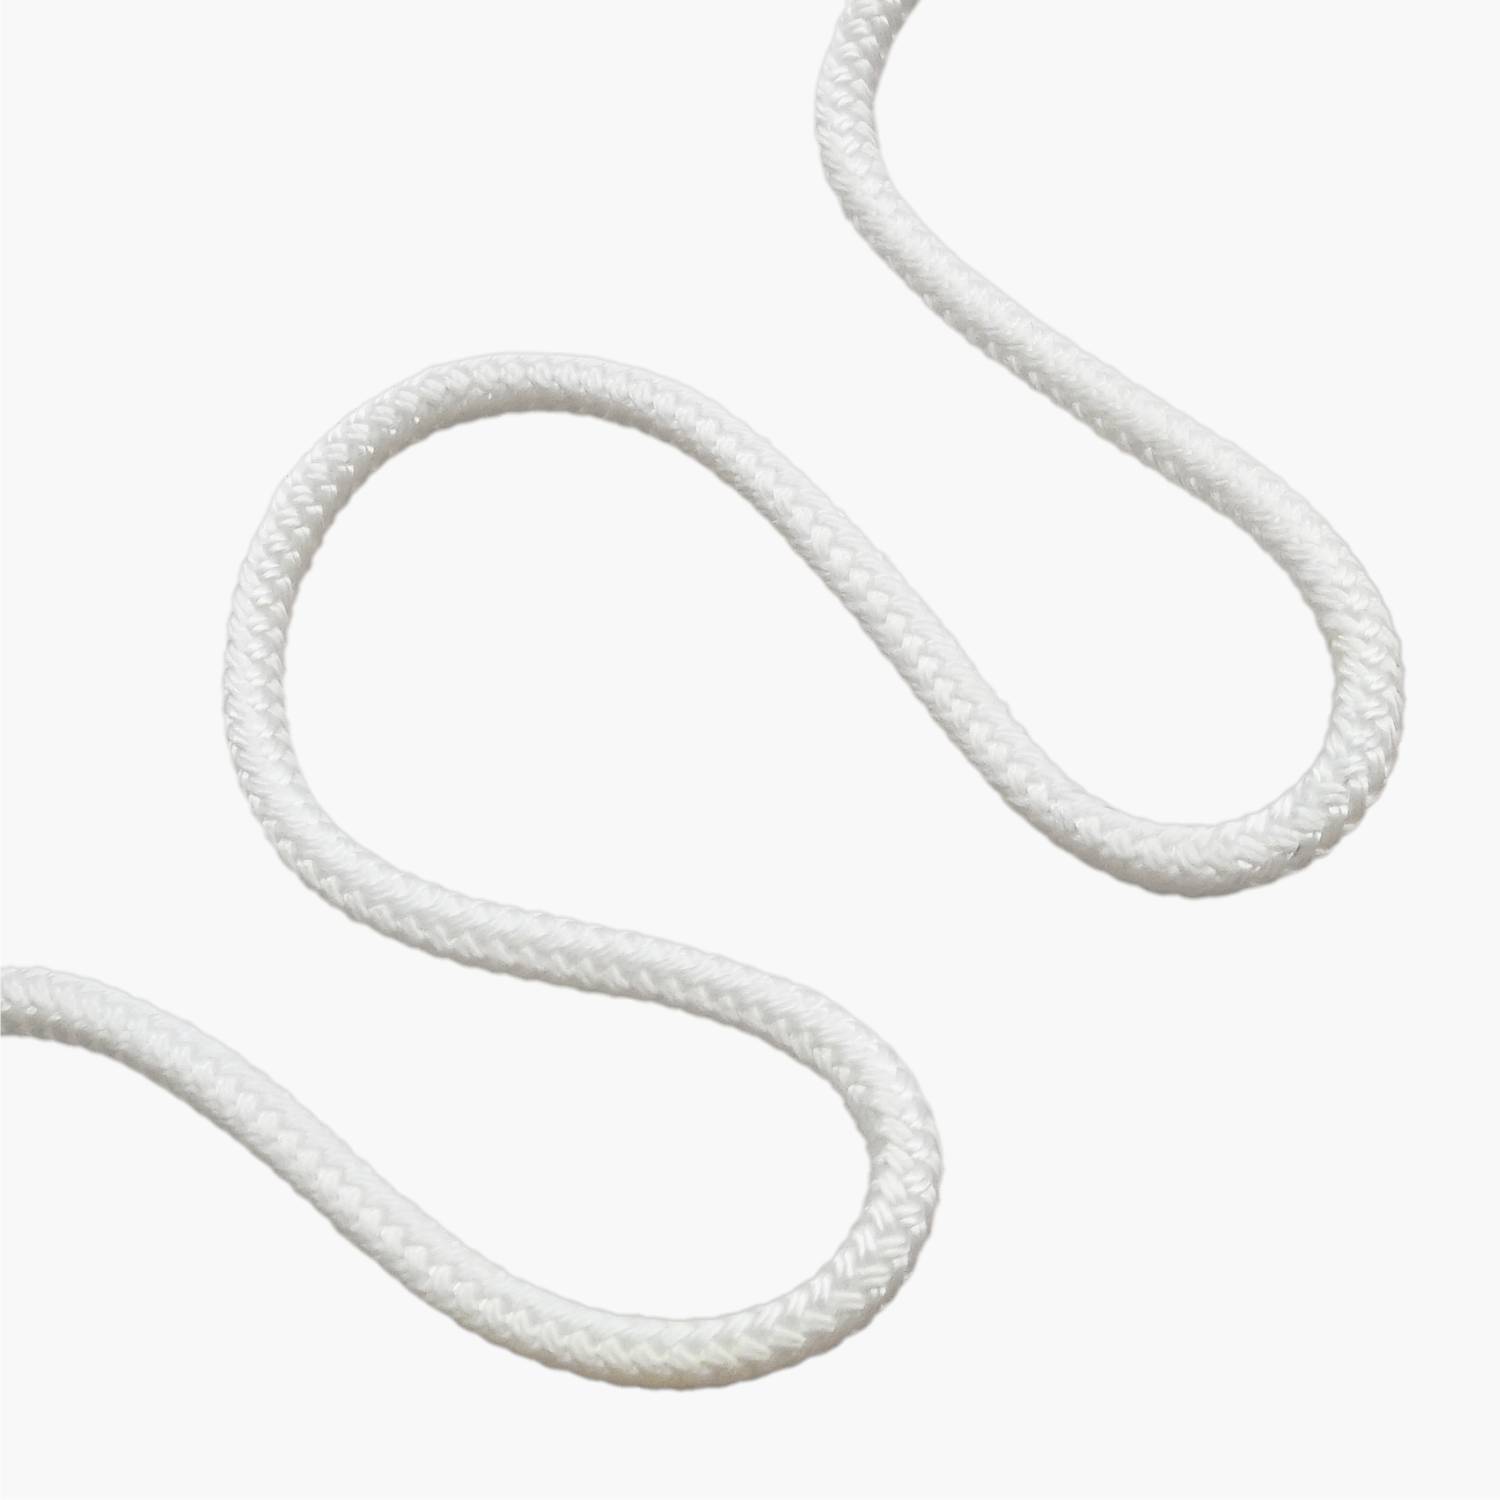 10mm 3 Strand Nylon Marine Rope | Lomo Watersport UK. Wetsuits, Dry Bags &  Outdoor Gear.